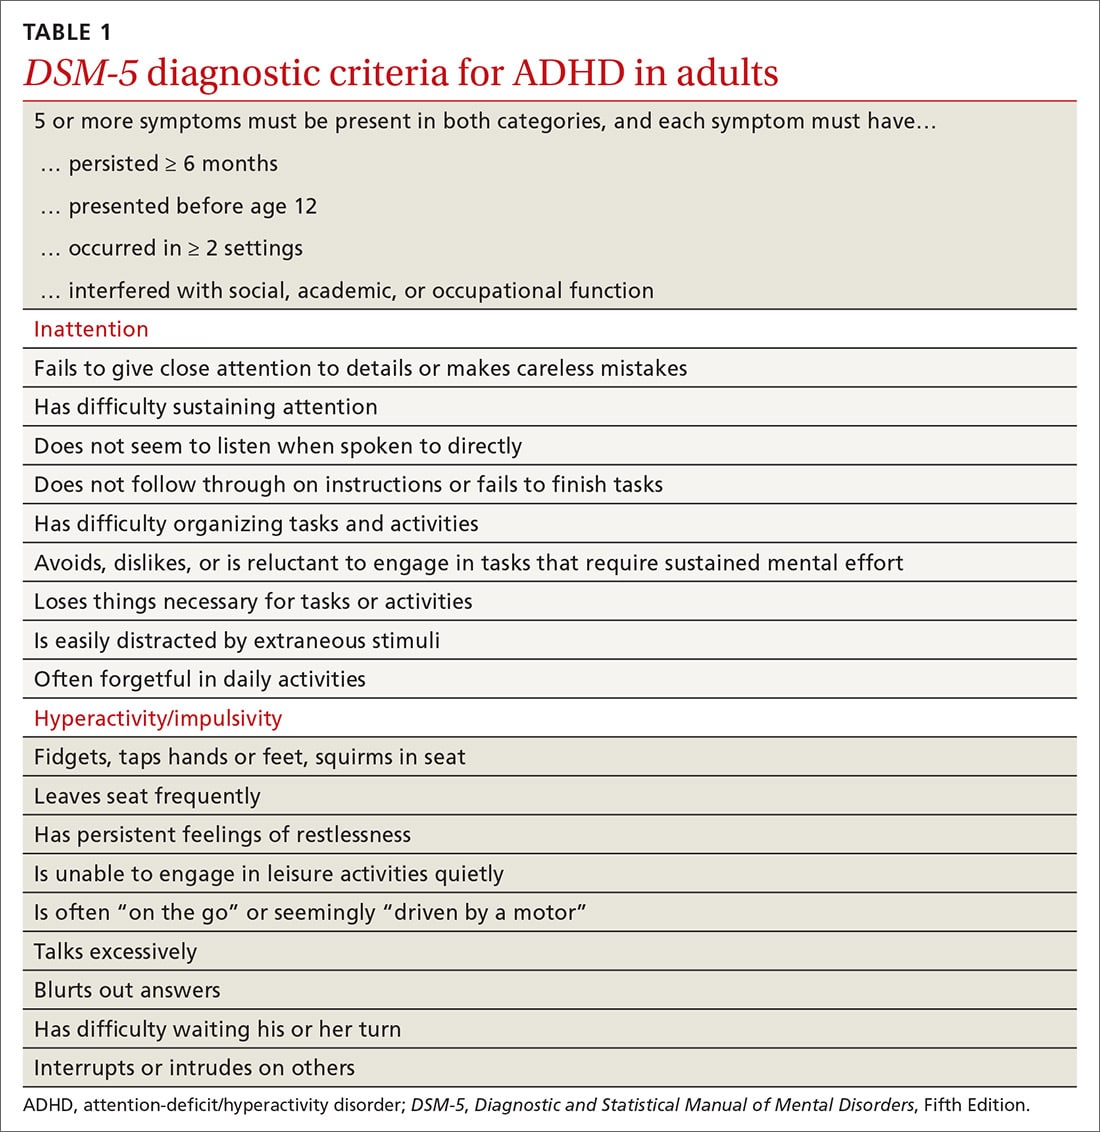 Working adeptly to diagnose and treat adult ADHD